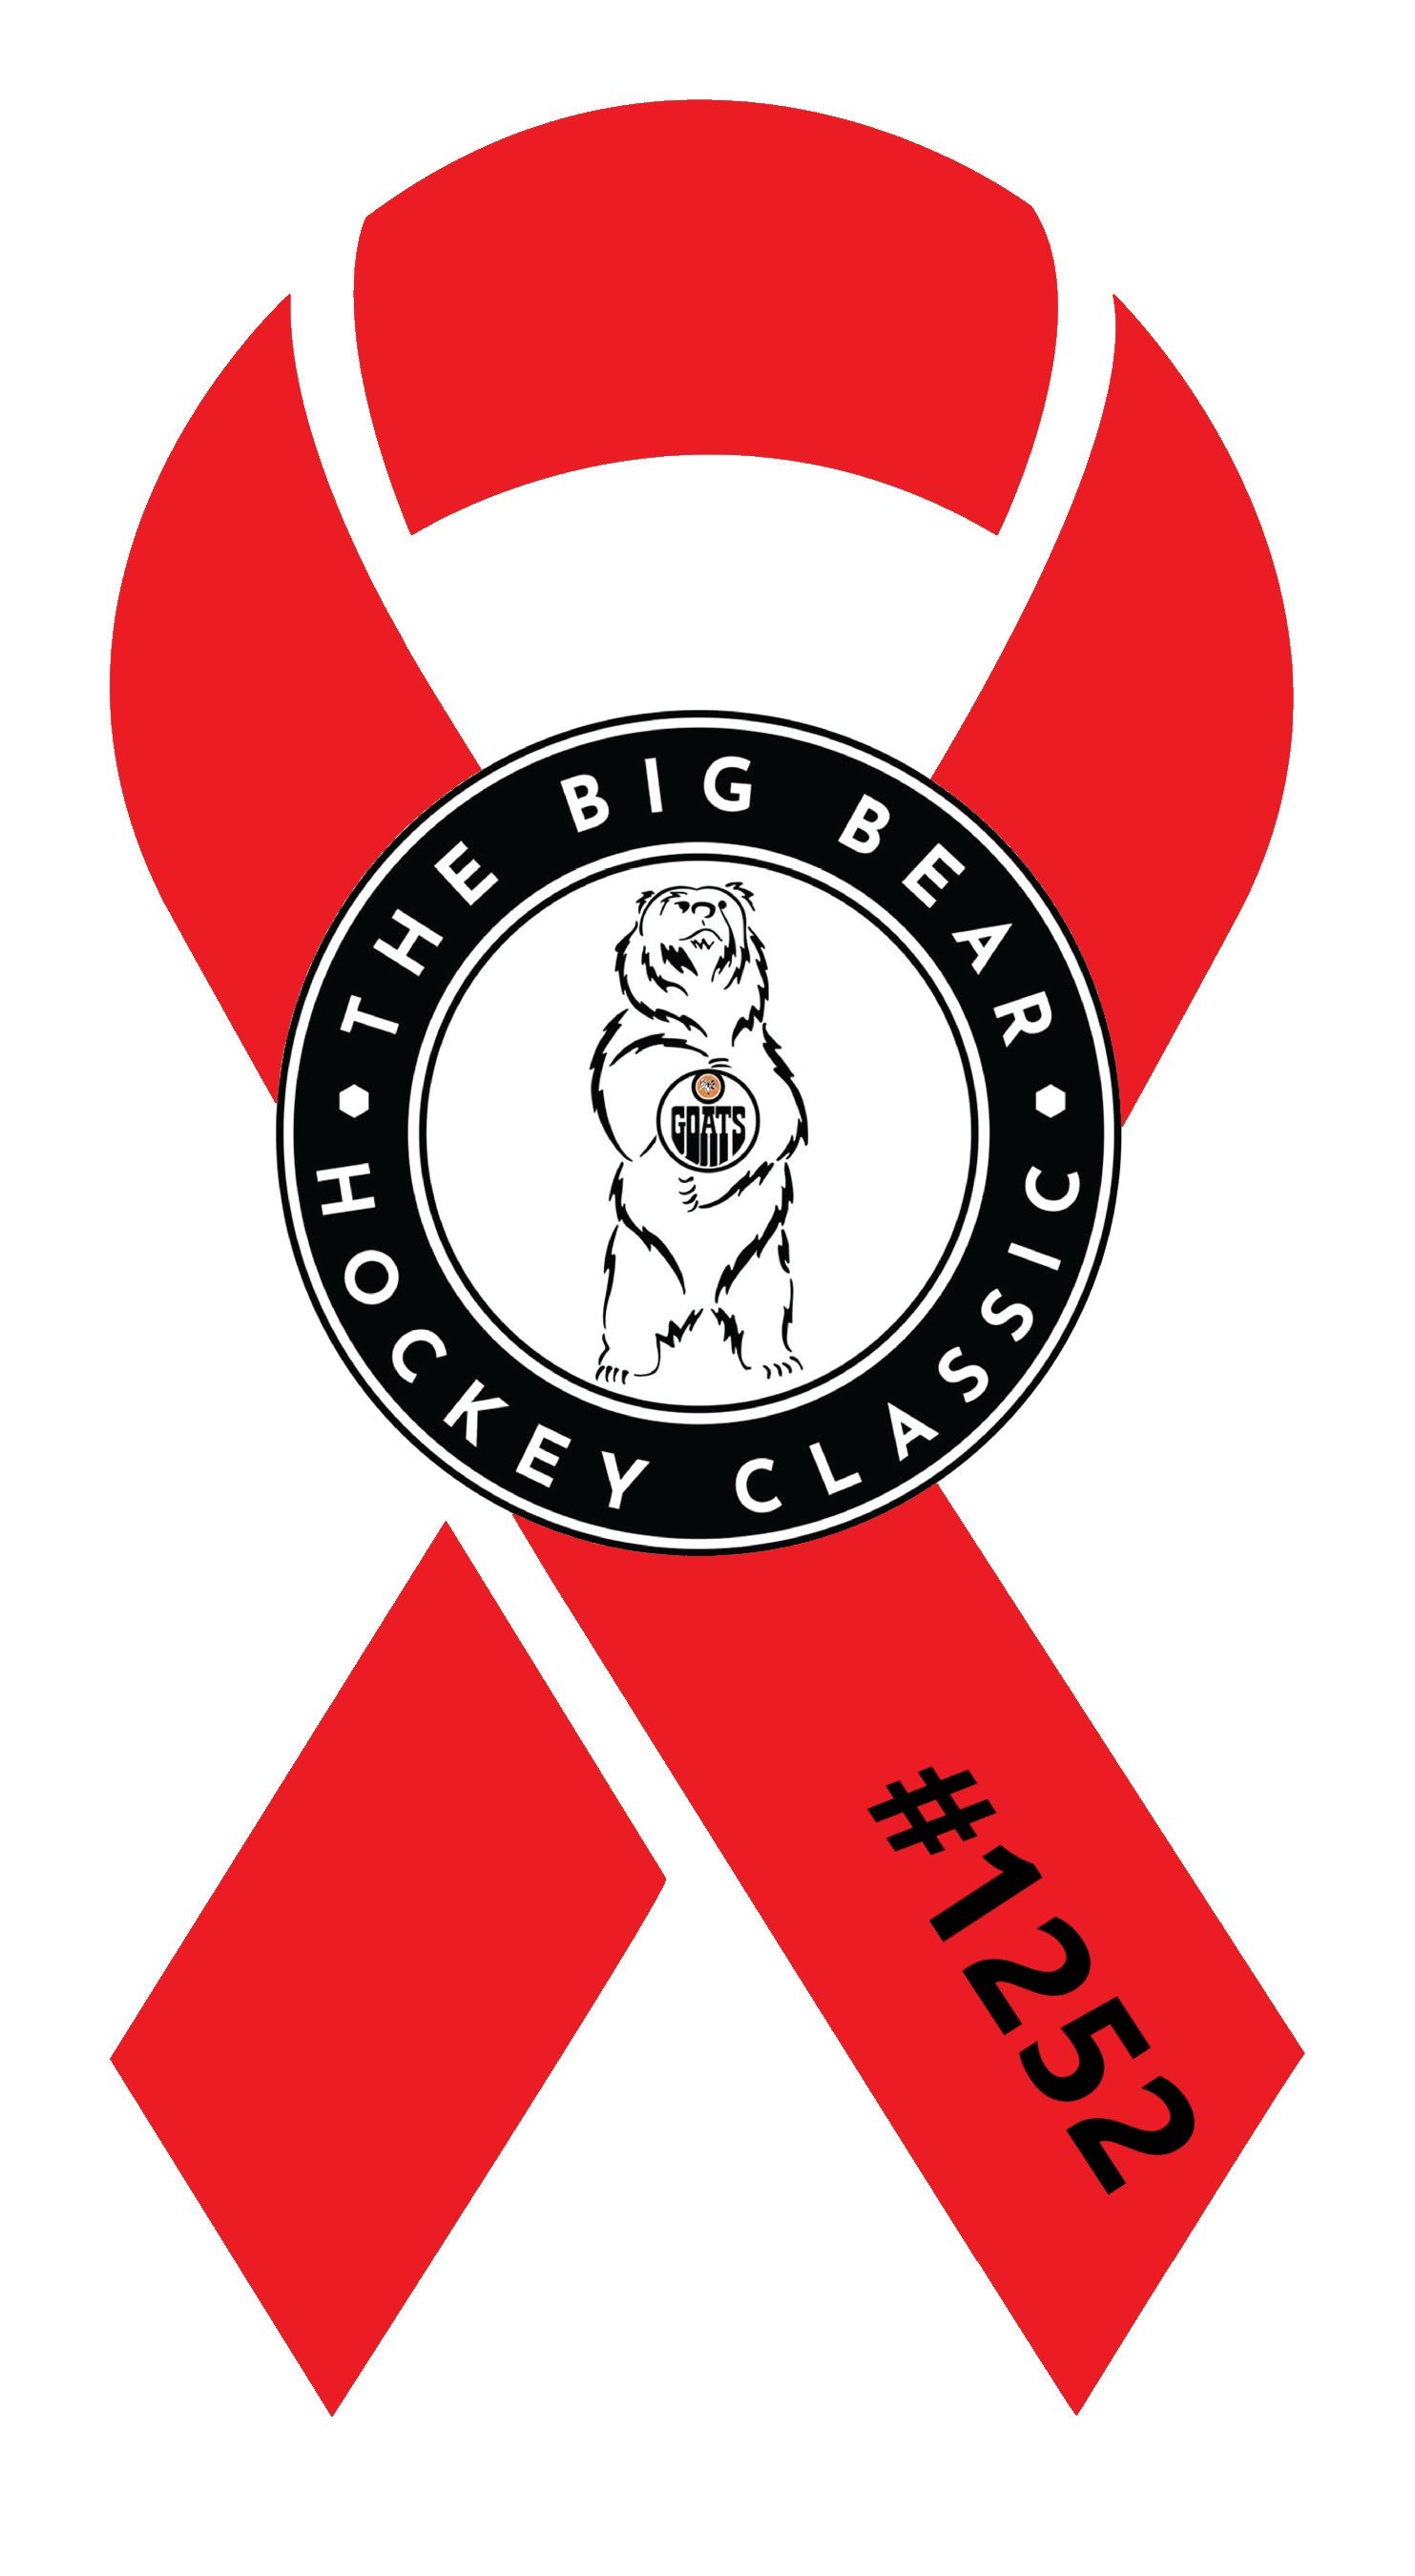 Minnesota Top Team &amp; Off The Chain Boat Rentals presents, The 6th Annual Big Bear Hockey Classic